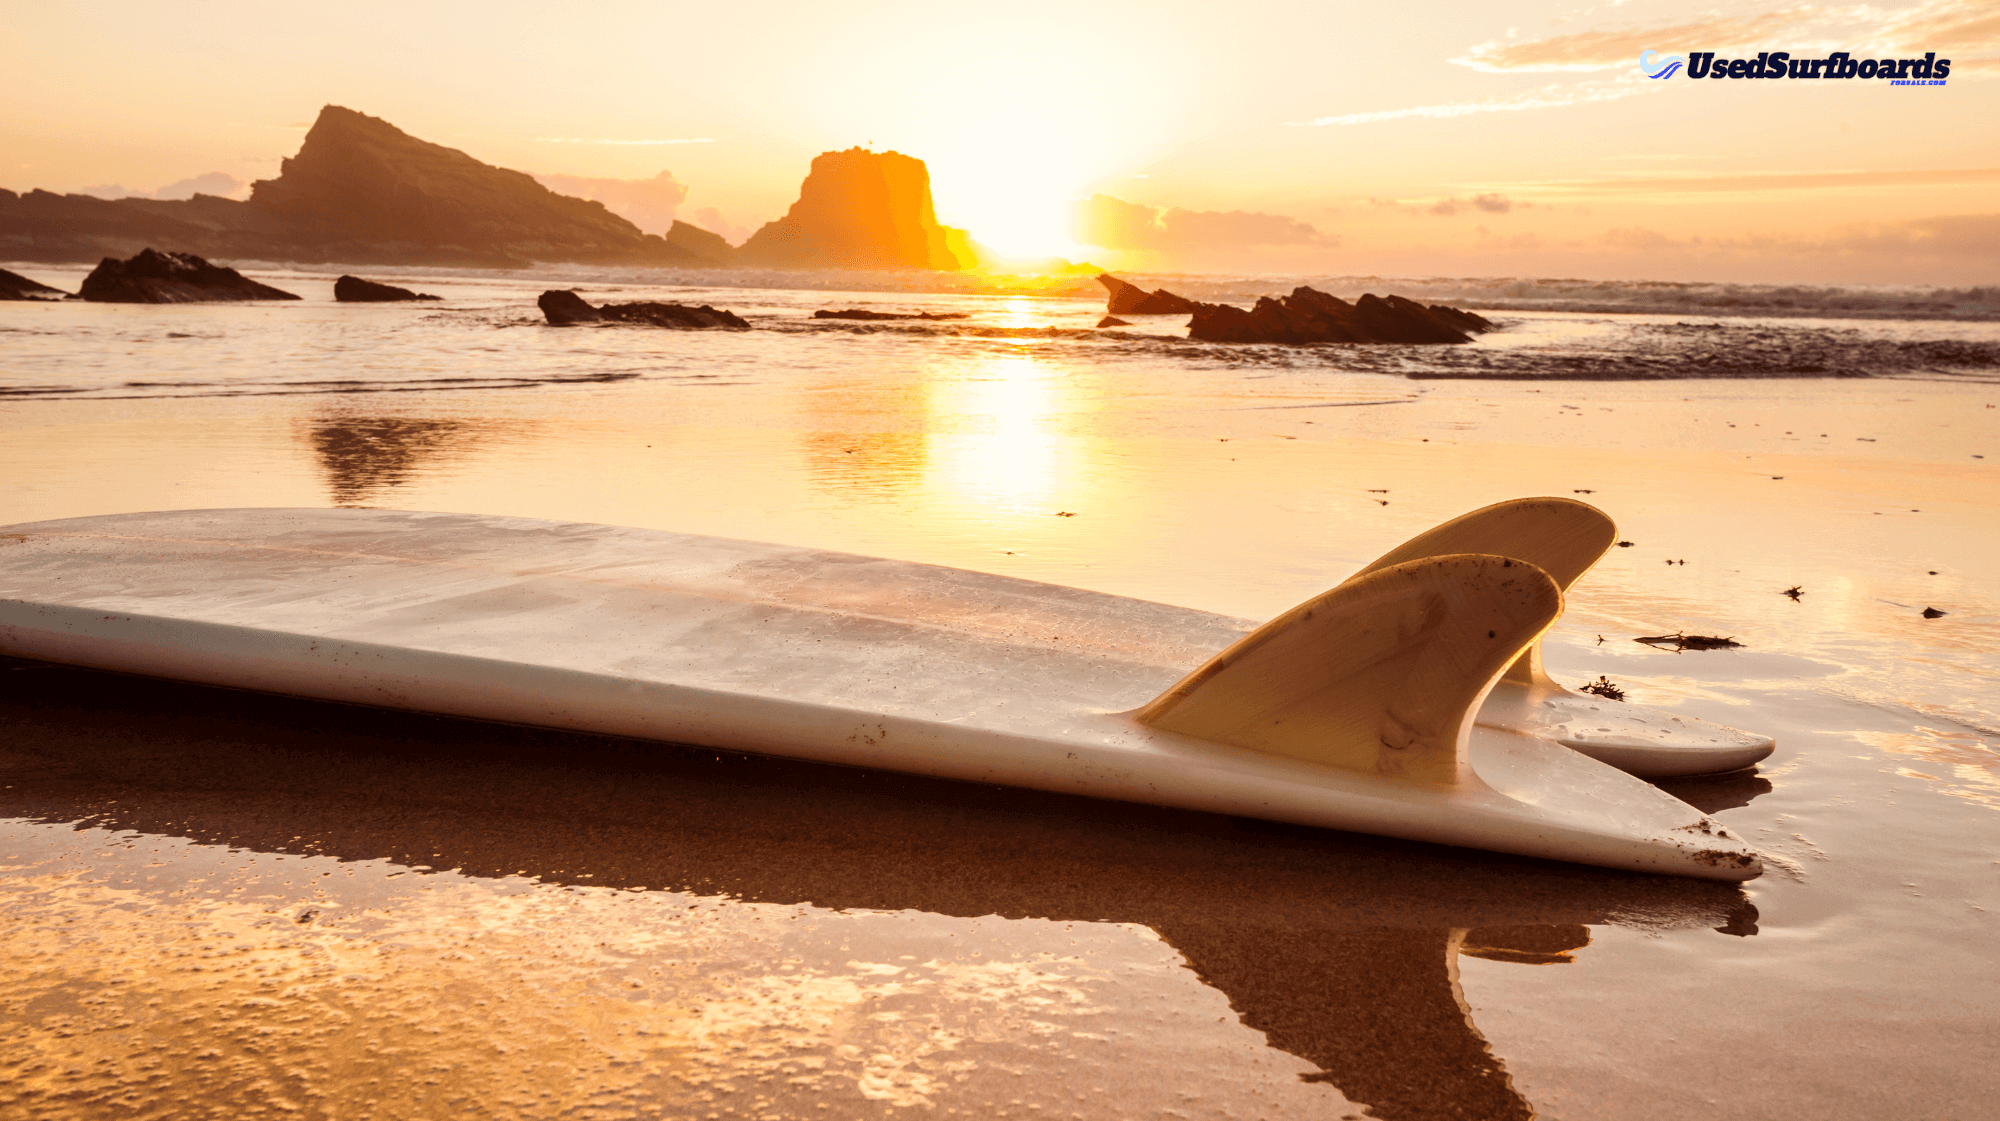 Wake Surfboard: Ride the Waves with Style and Ease